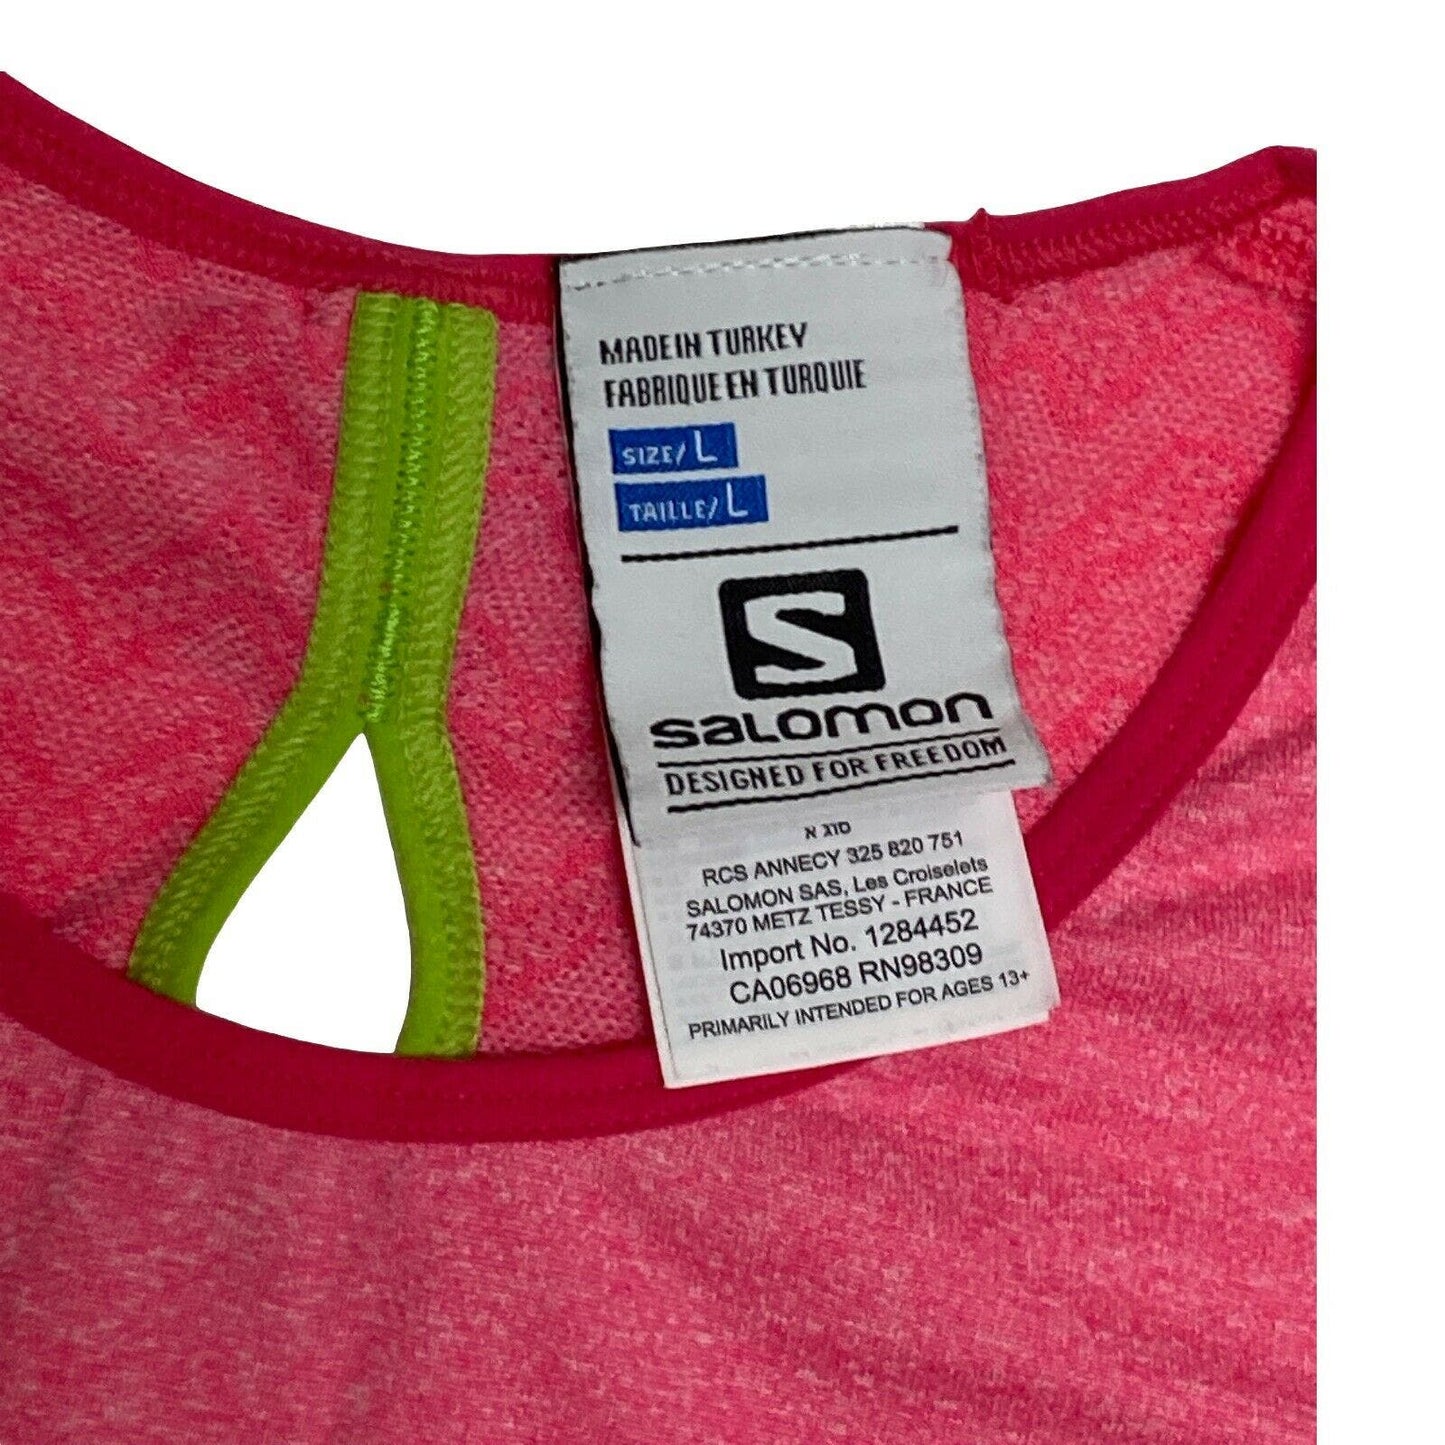 Salomon Pink Long Sleeve Seamless Pullover Top Shirt Size Large Advance Skin Dry